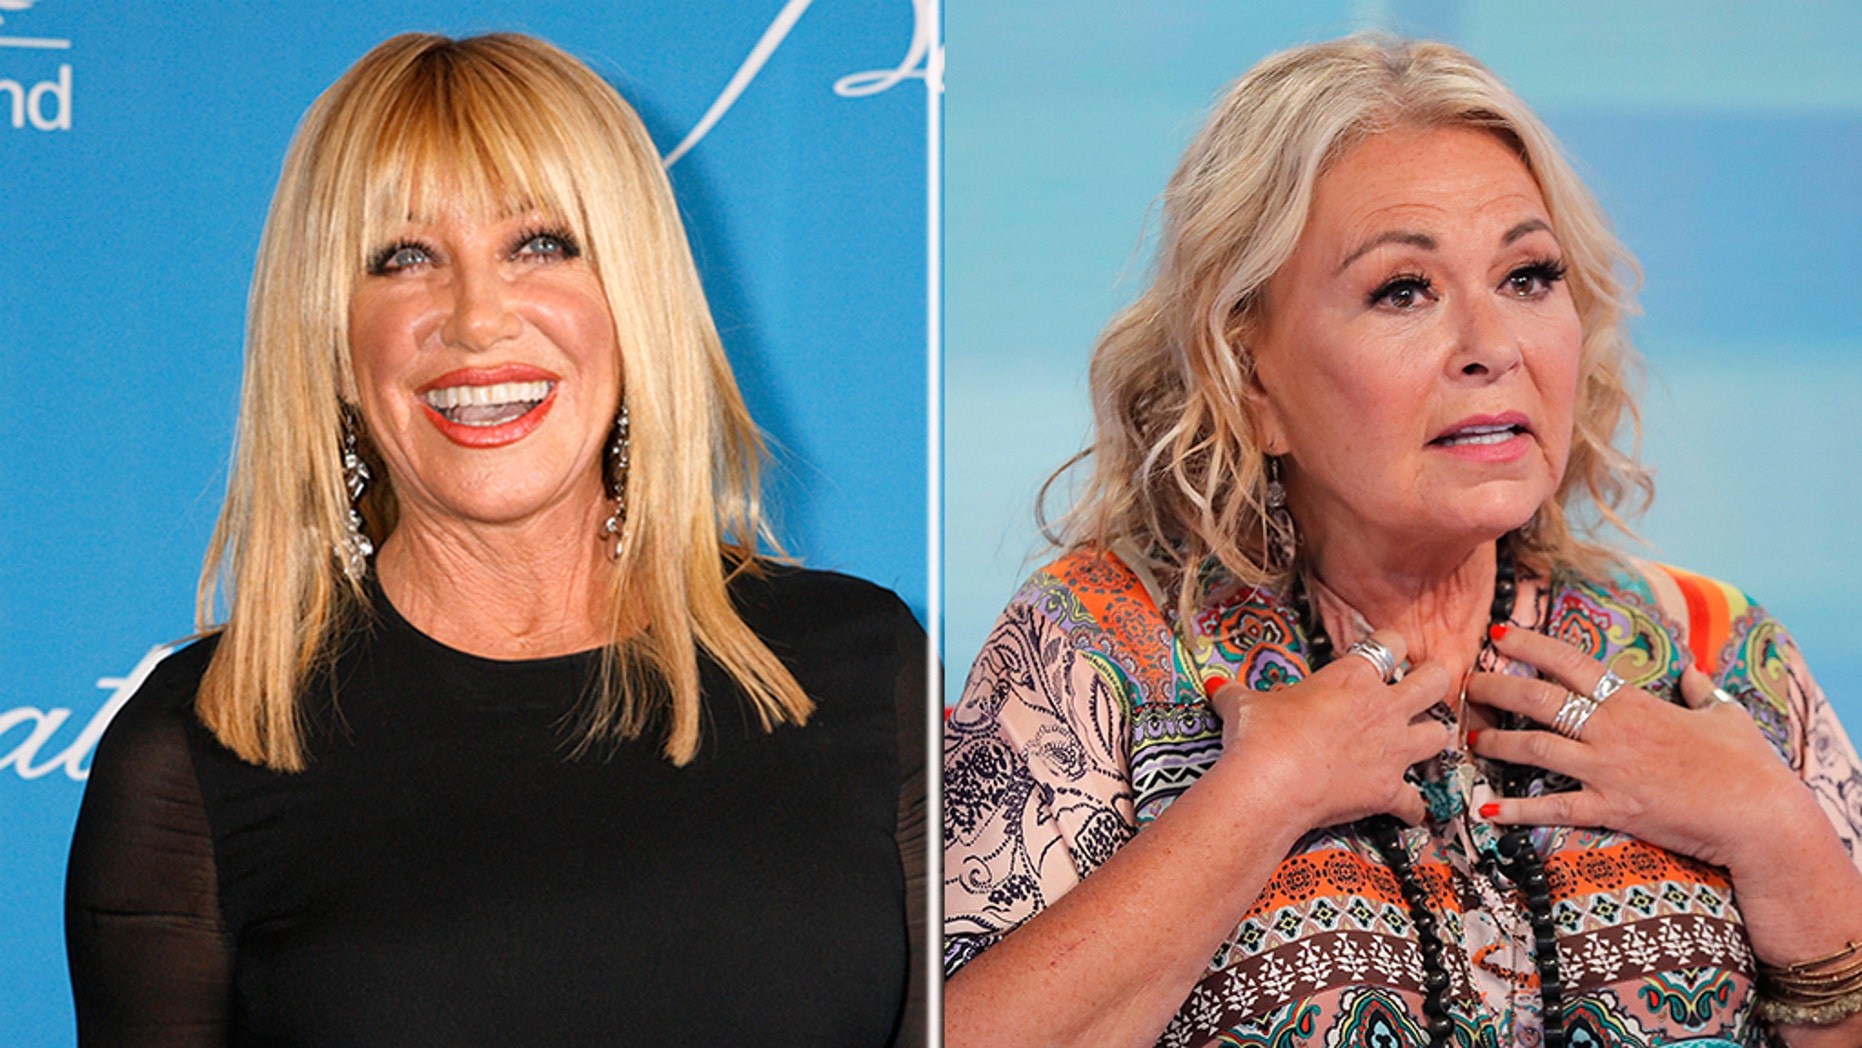 Suzanne Somers is weighing in on Roseanne Barr's firing from ABC in a new interview with Yahoo Entertainment published on Tuesday.